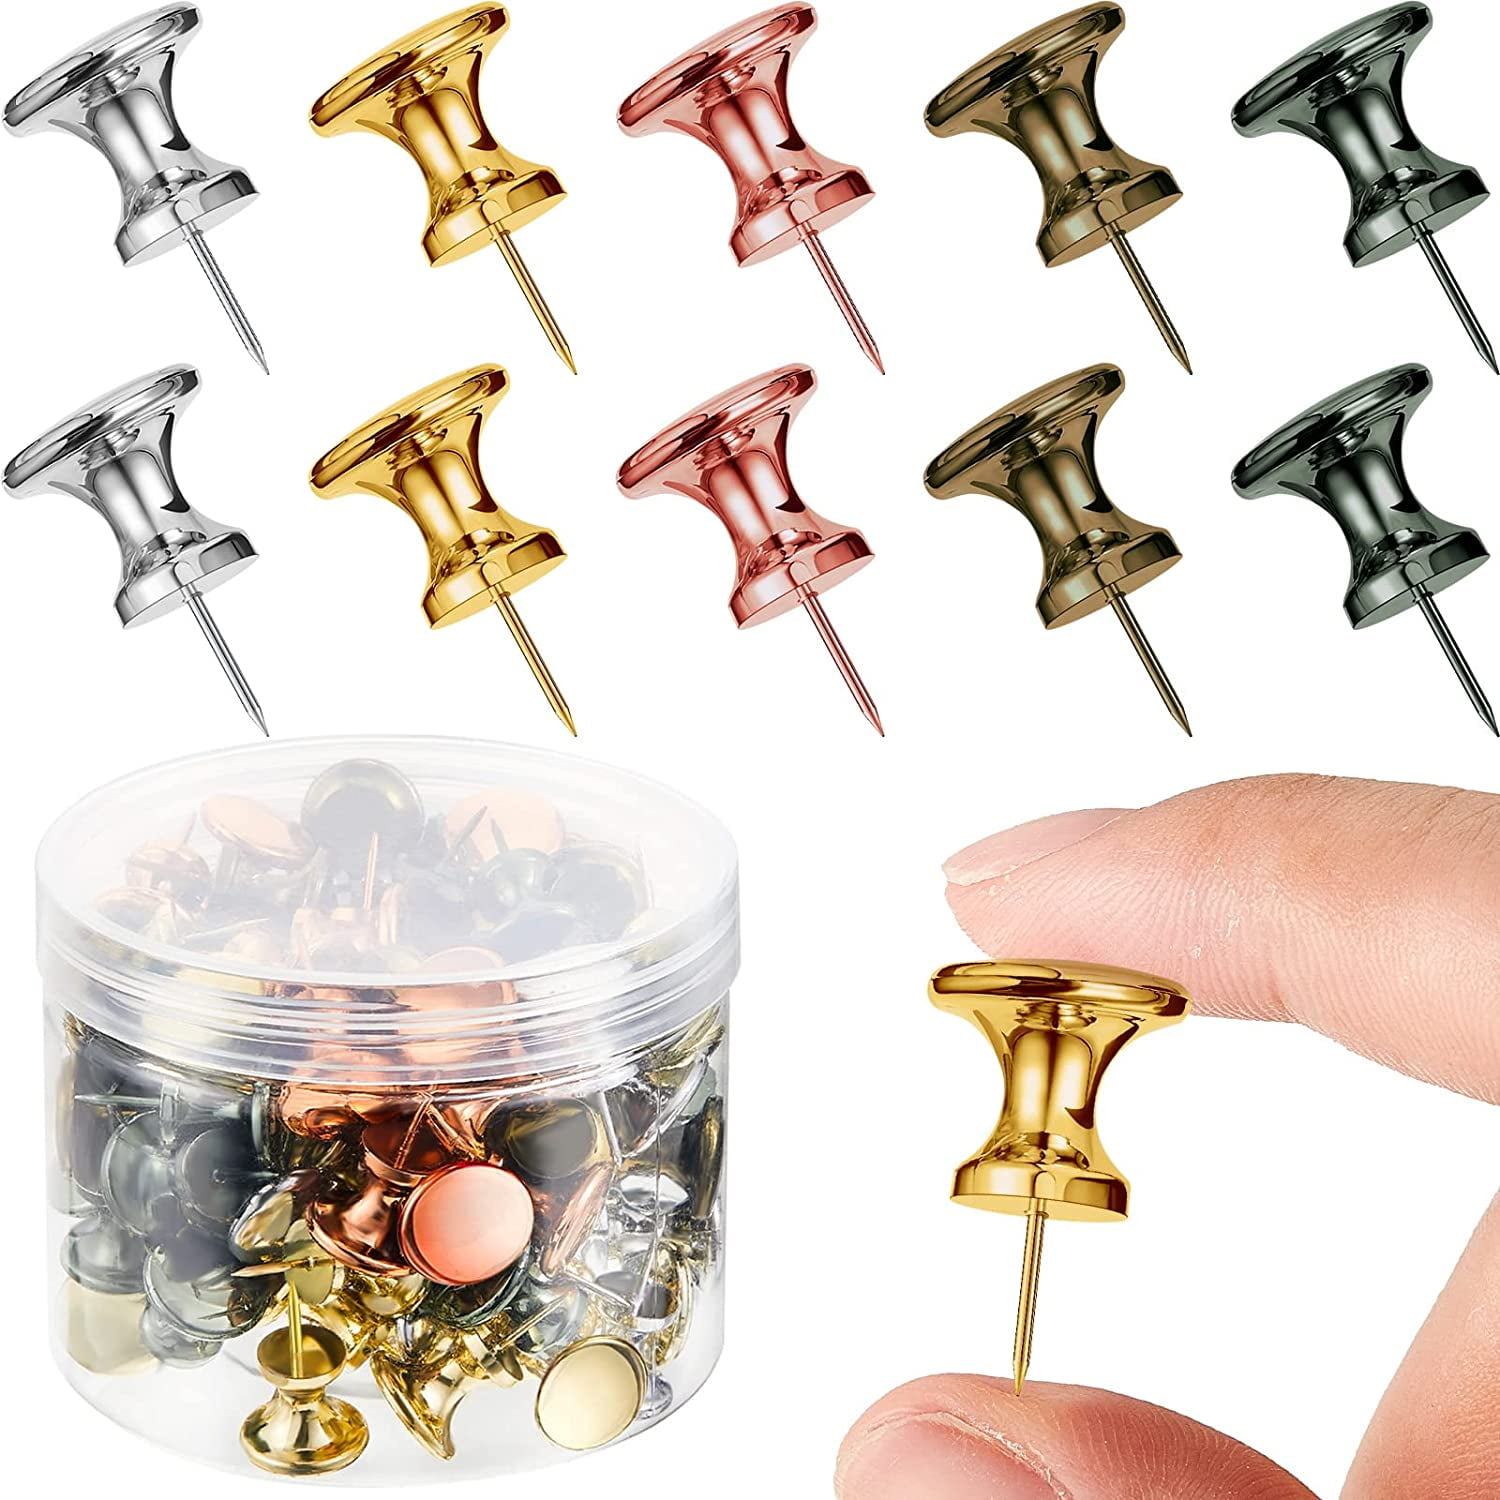 100 Pieces Jumbo Giant Large Push Pins 1 Inch Standard Thumb Tacks Steel  Point and Plastic Head Push Pins for Cork Board (Gold, Silver, Bronze, Rose